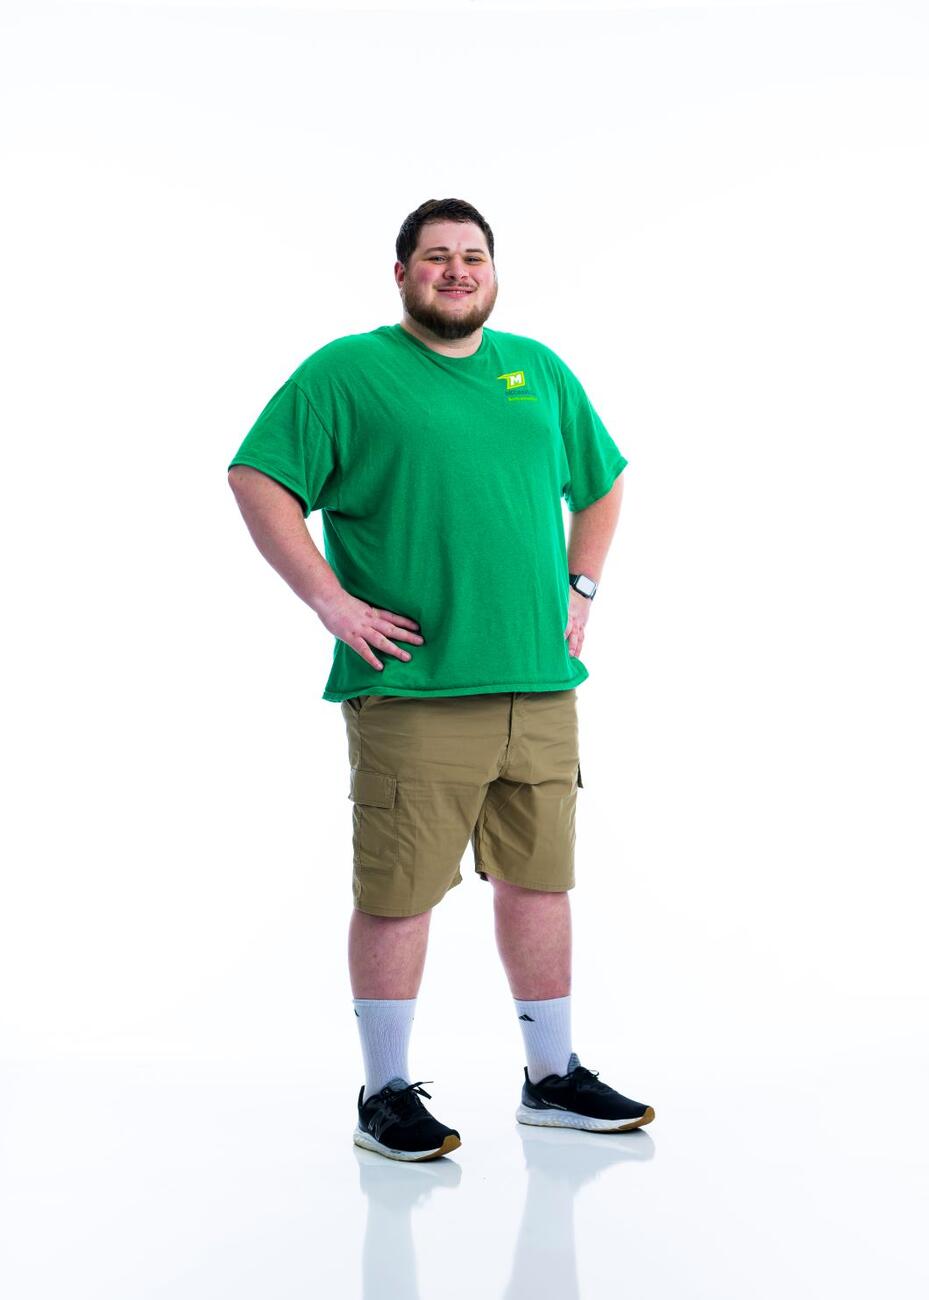 A student in a green shirt stands with his hands on his hips in front of a white background.